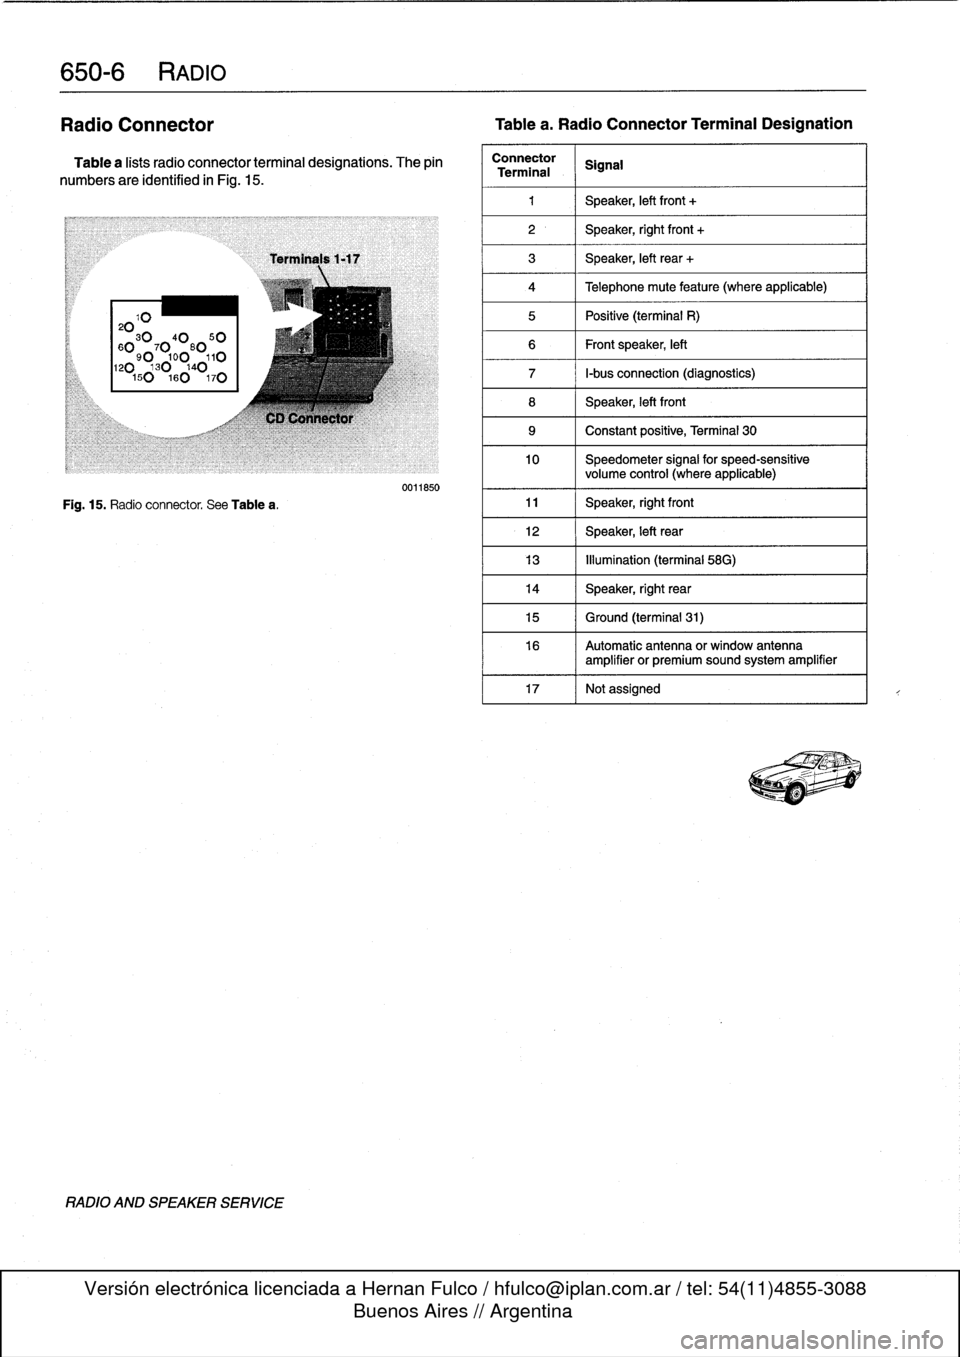 BMW 323i 1996 E36 Workshop Manual 
650-
6
RADIO

Radio
Connector

	

Tablea
.
Radio
Connector
Terminal
Designation

Table
a
lists
radio
connector
terminal
designations
.
The
pin

numbers
are
identified
in
Fig
.
15
.

20103040
50

60
9